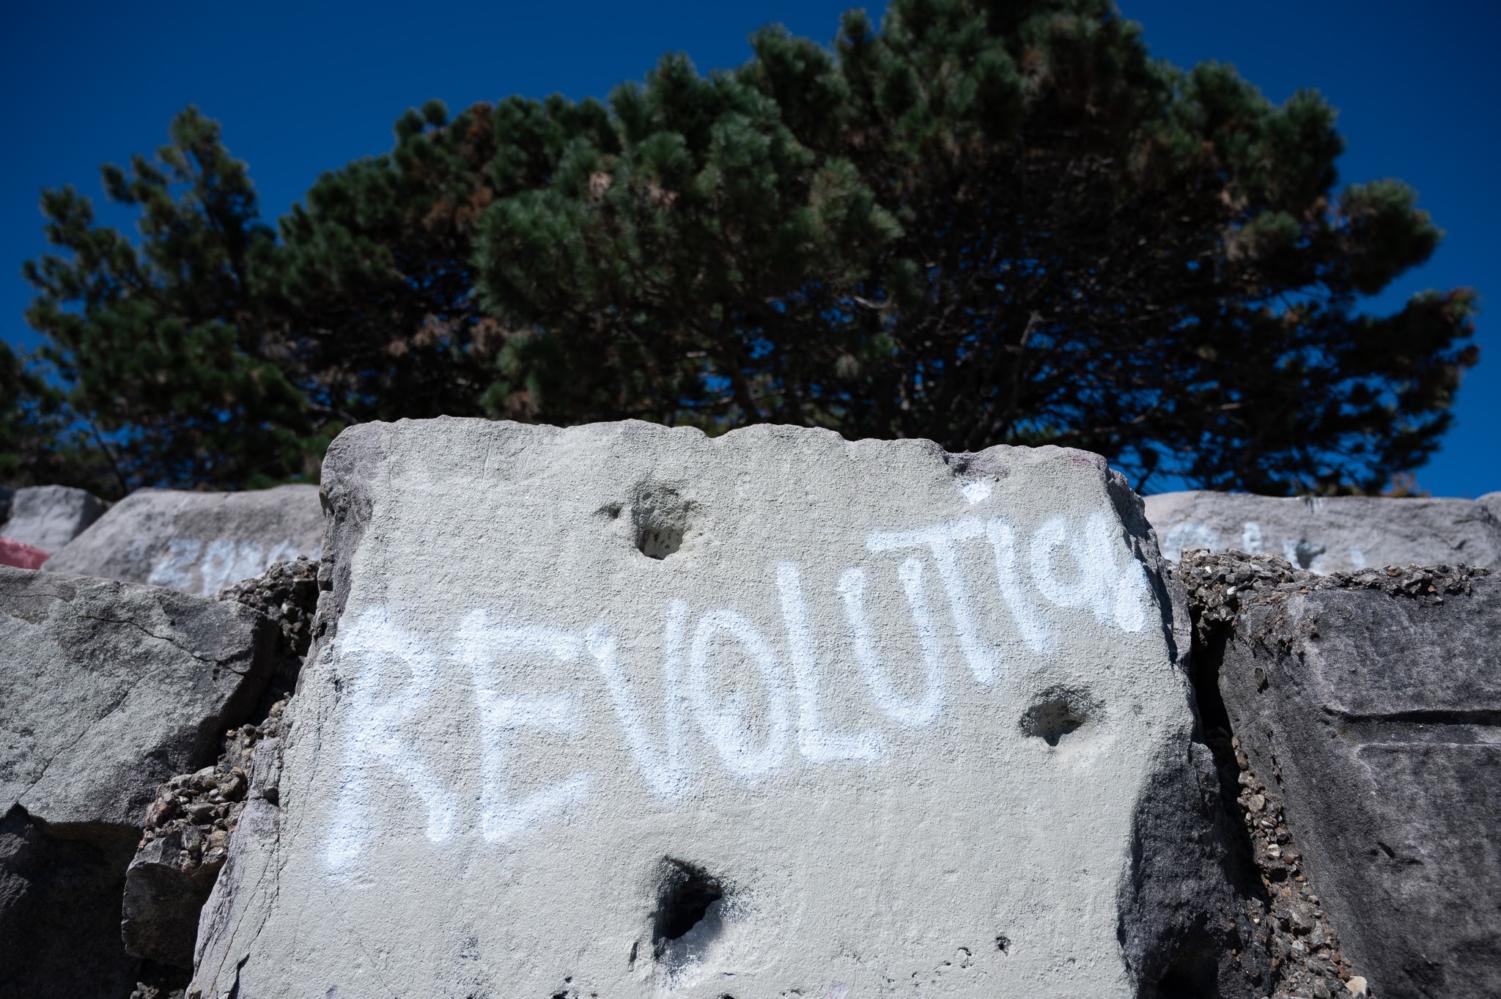 The Point’s limestone also serves as a canvas for local graffiti artists, especially with political messages.